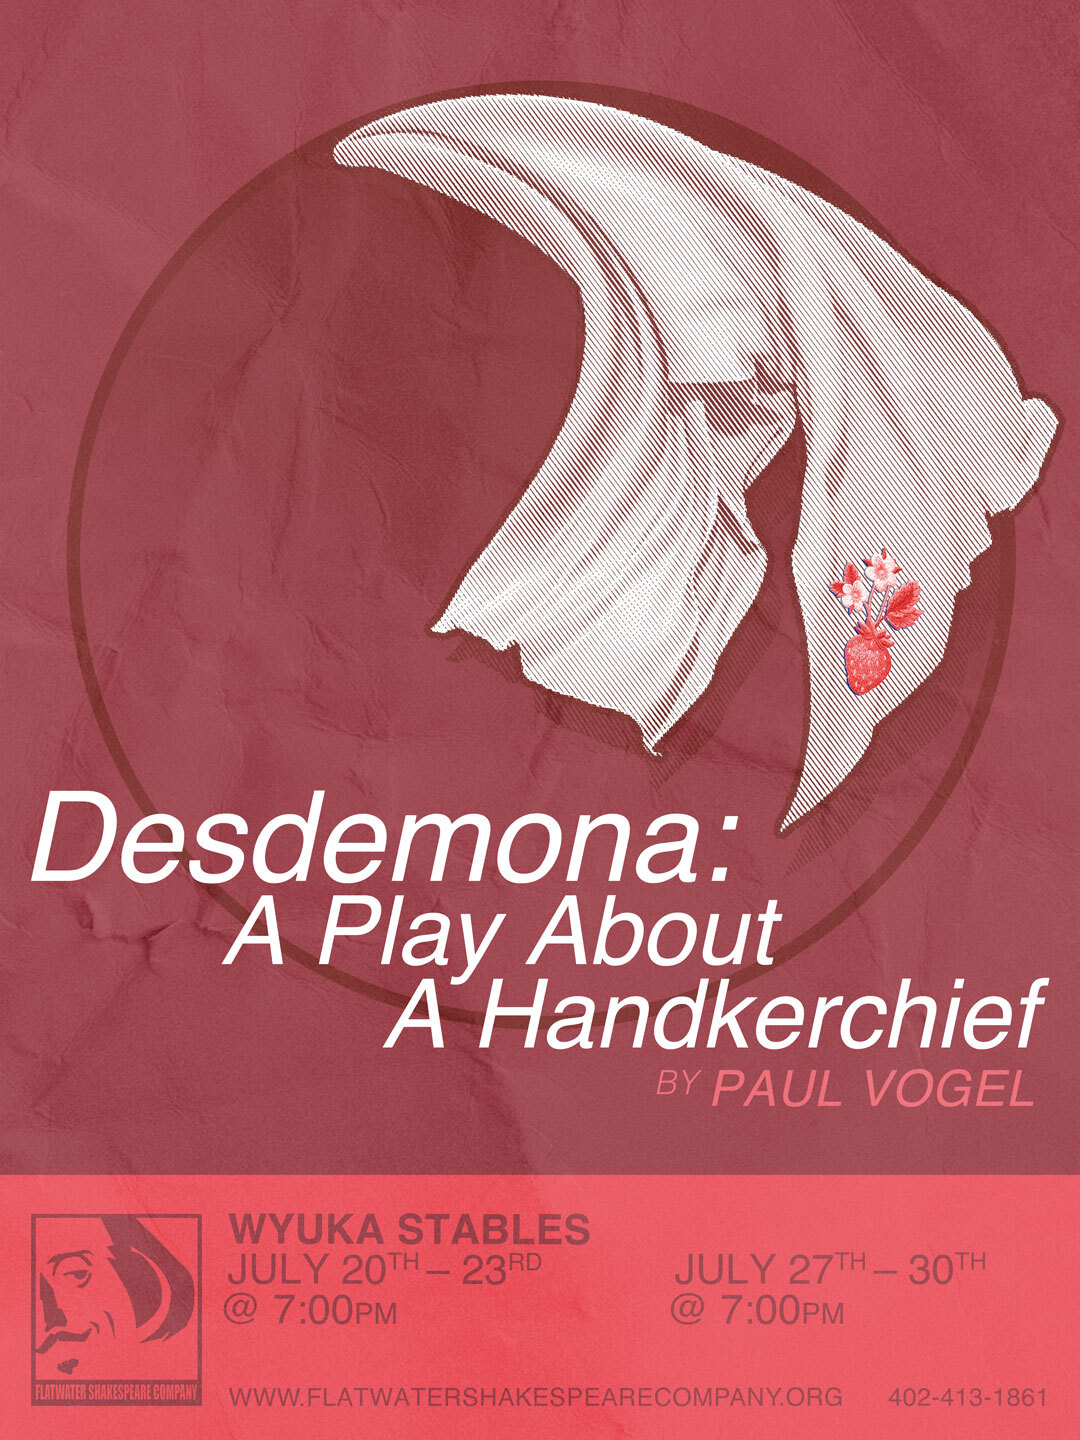 7/22 STU - STUDENT: Sat. July 22, 2023 | 7:00 p.m. - 10:00 p.m. CST | Wyuka Stables (Desdemona: A Play about a Handkerchief)